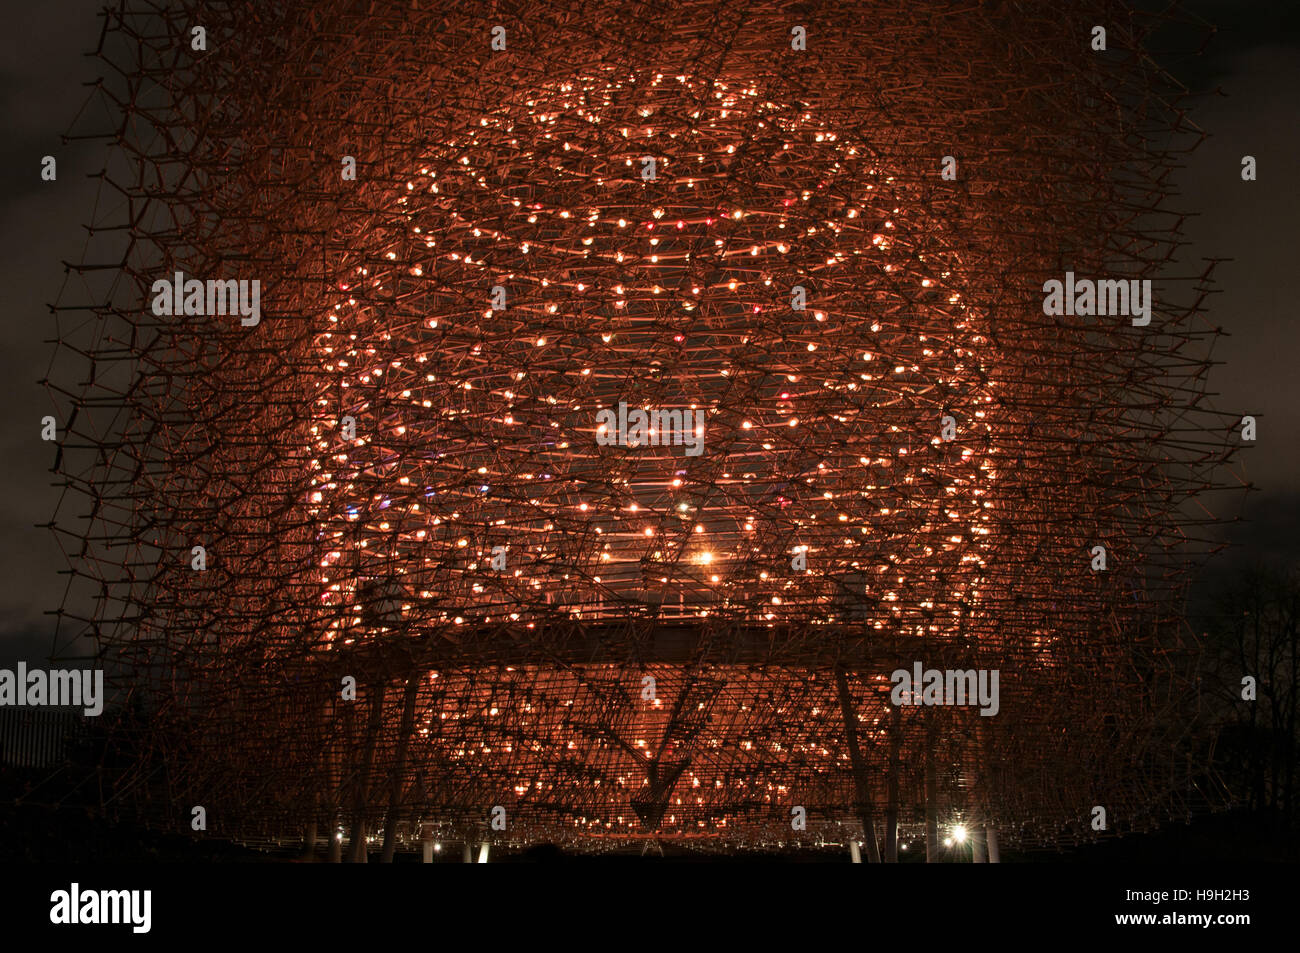 London, UK. 22nd Nov, 2016. Wolfgang Buttress’ Hive illuminated at Kew Gardens as part of the Christmas at Kew light trail. More than 60,000 lights illuminate the trees, plants and gardens. The trail is more than a mile long and includes artworks from both UK and international artists and designers. The show opens 23rd November 2016 and closes 2nd January 2017. Credit:  Tricia de Courcy Ling/Alamy Live News Stock Photo